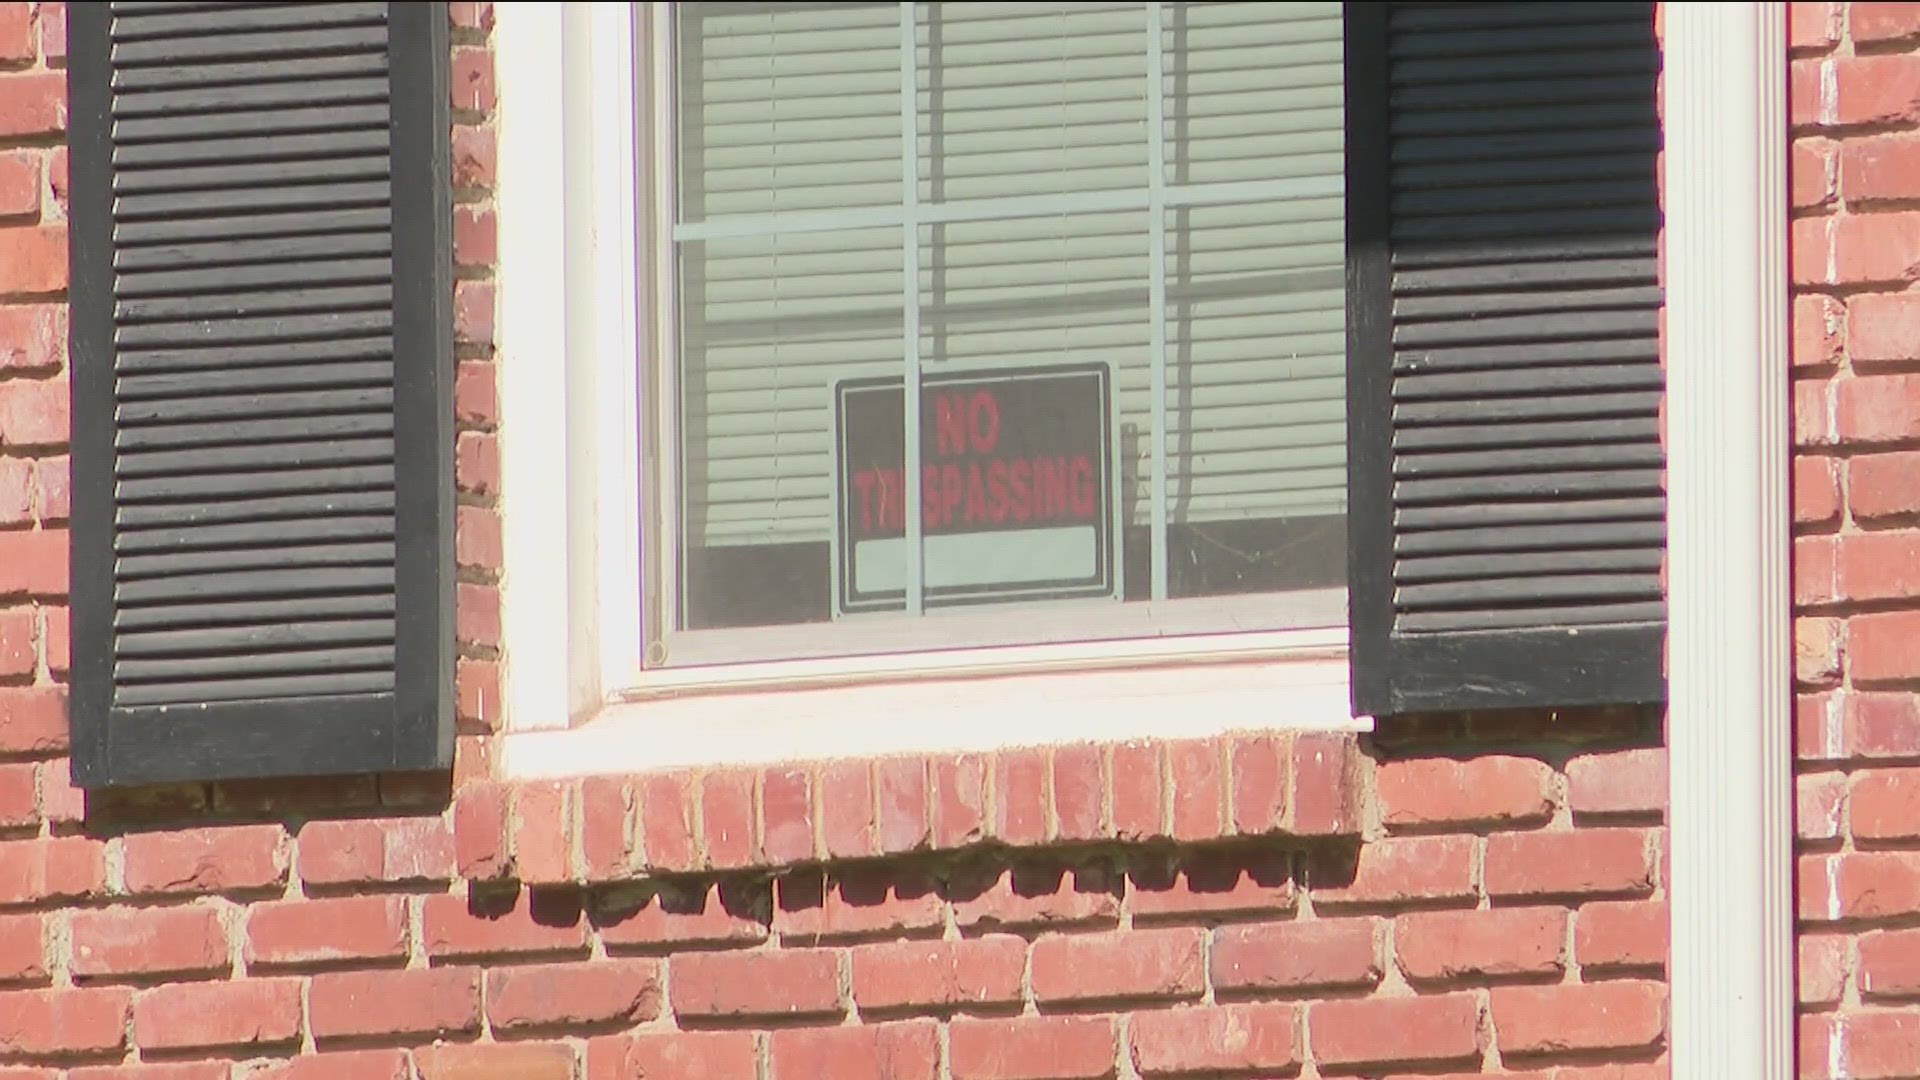 The couple staying in a College Park woman's rental home said that they signed a lease, but she stated she never saw it.